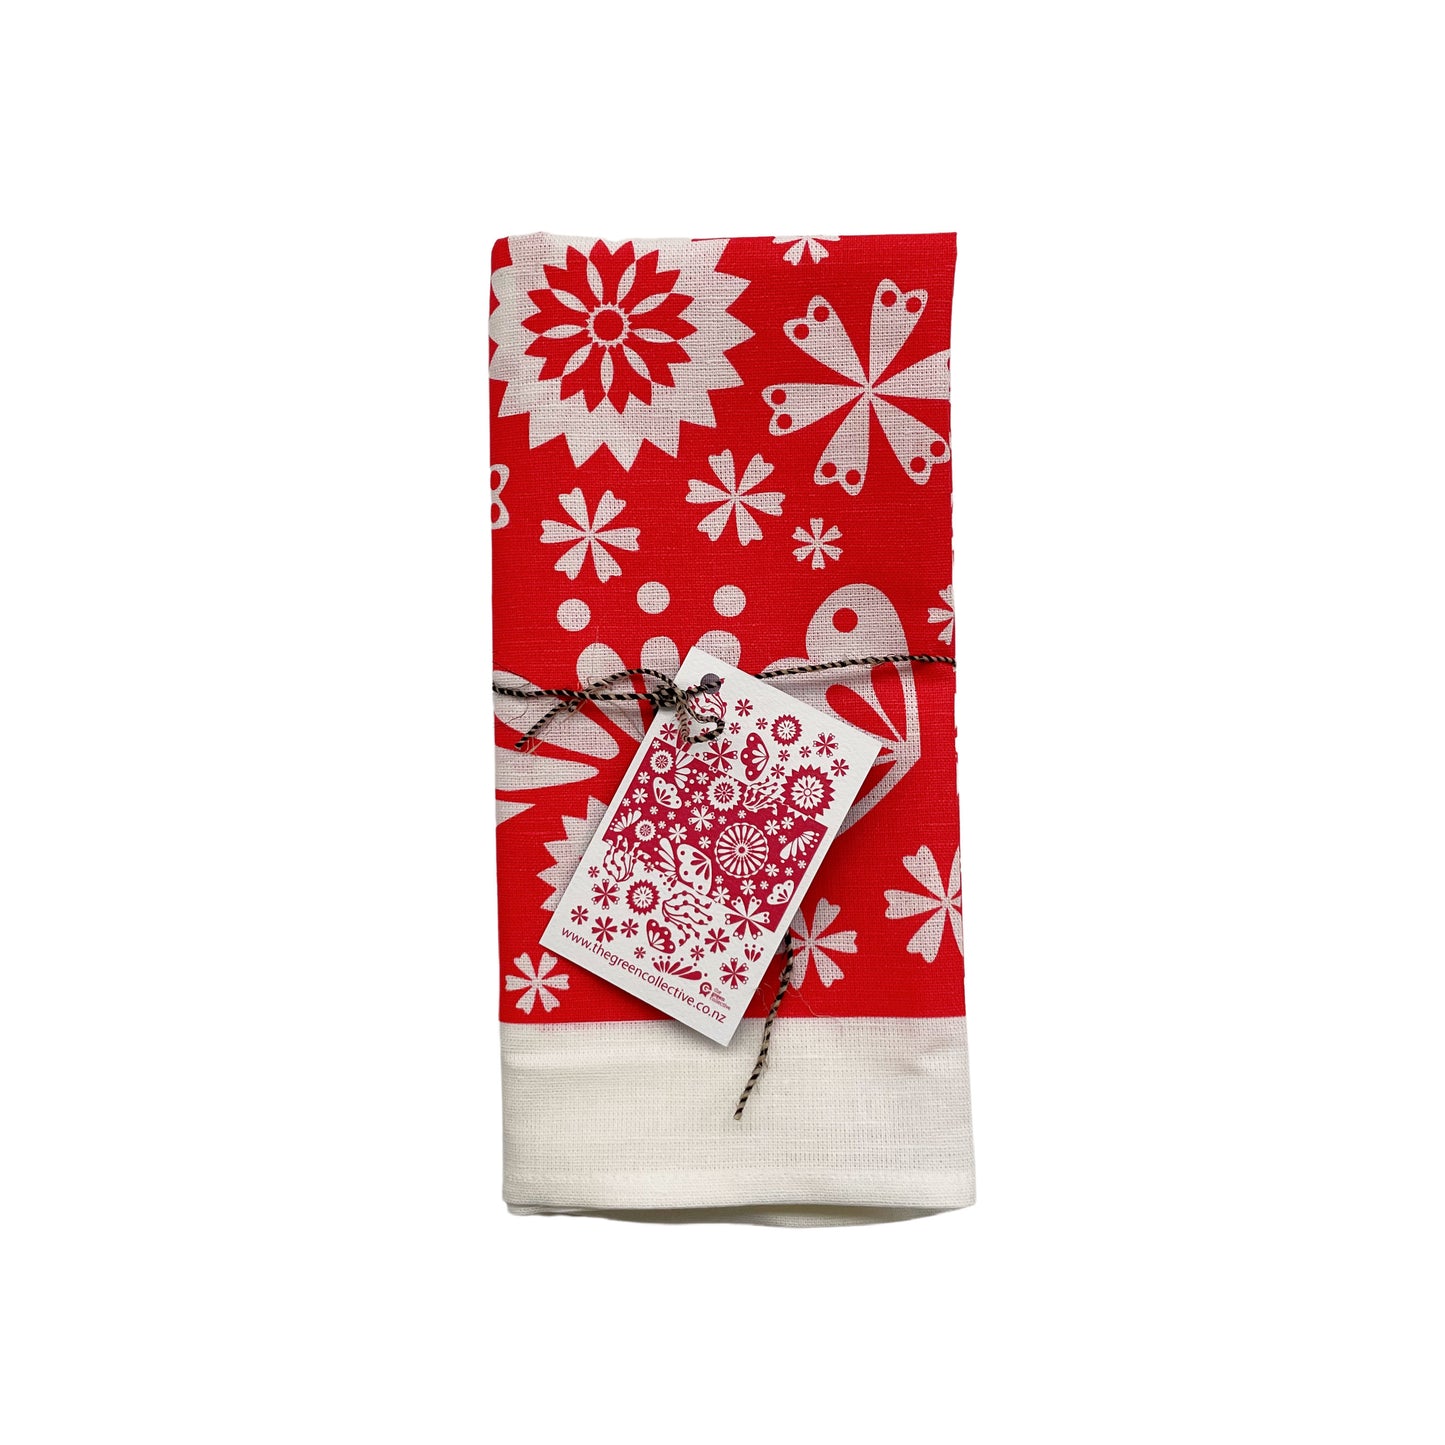 Red Flower Tea Towel by The Green Collective (50% Linen)